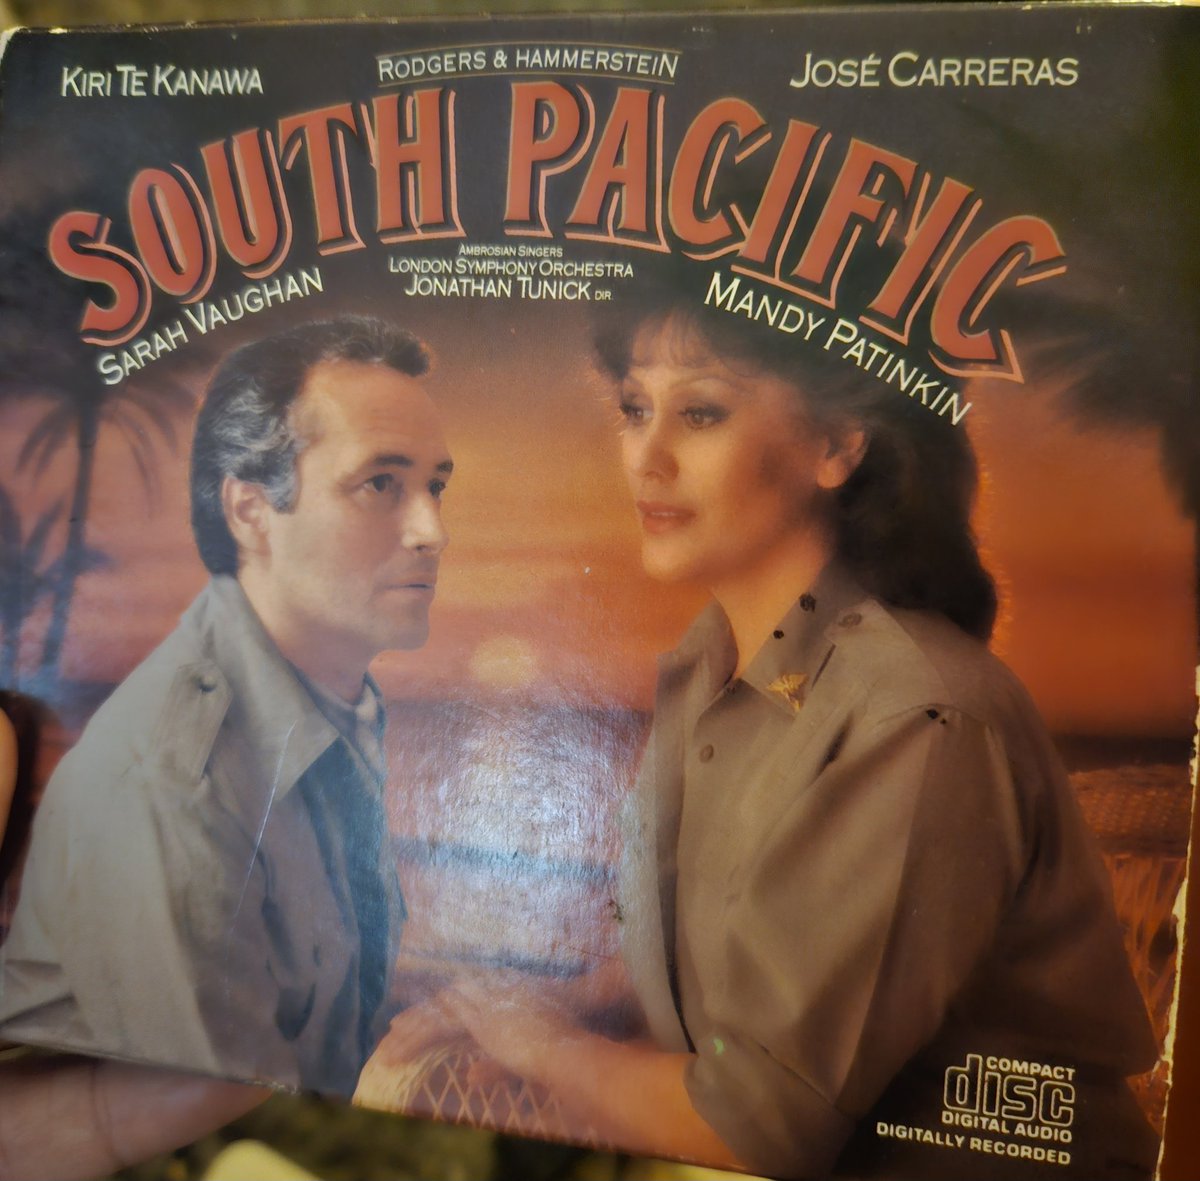 Waiting on this for ages. Stunning recording of South Pacific w/ @londonsymphony Kiri Te Kanawa & Jose Carreras shine but Mandy Patinkin's 'Younger than Springtime' is sublime Kiri recording I'm Gonna Wash that Man Right Out of my Hair here youtu.be/hWJLqzWpxiU?si… #musicals